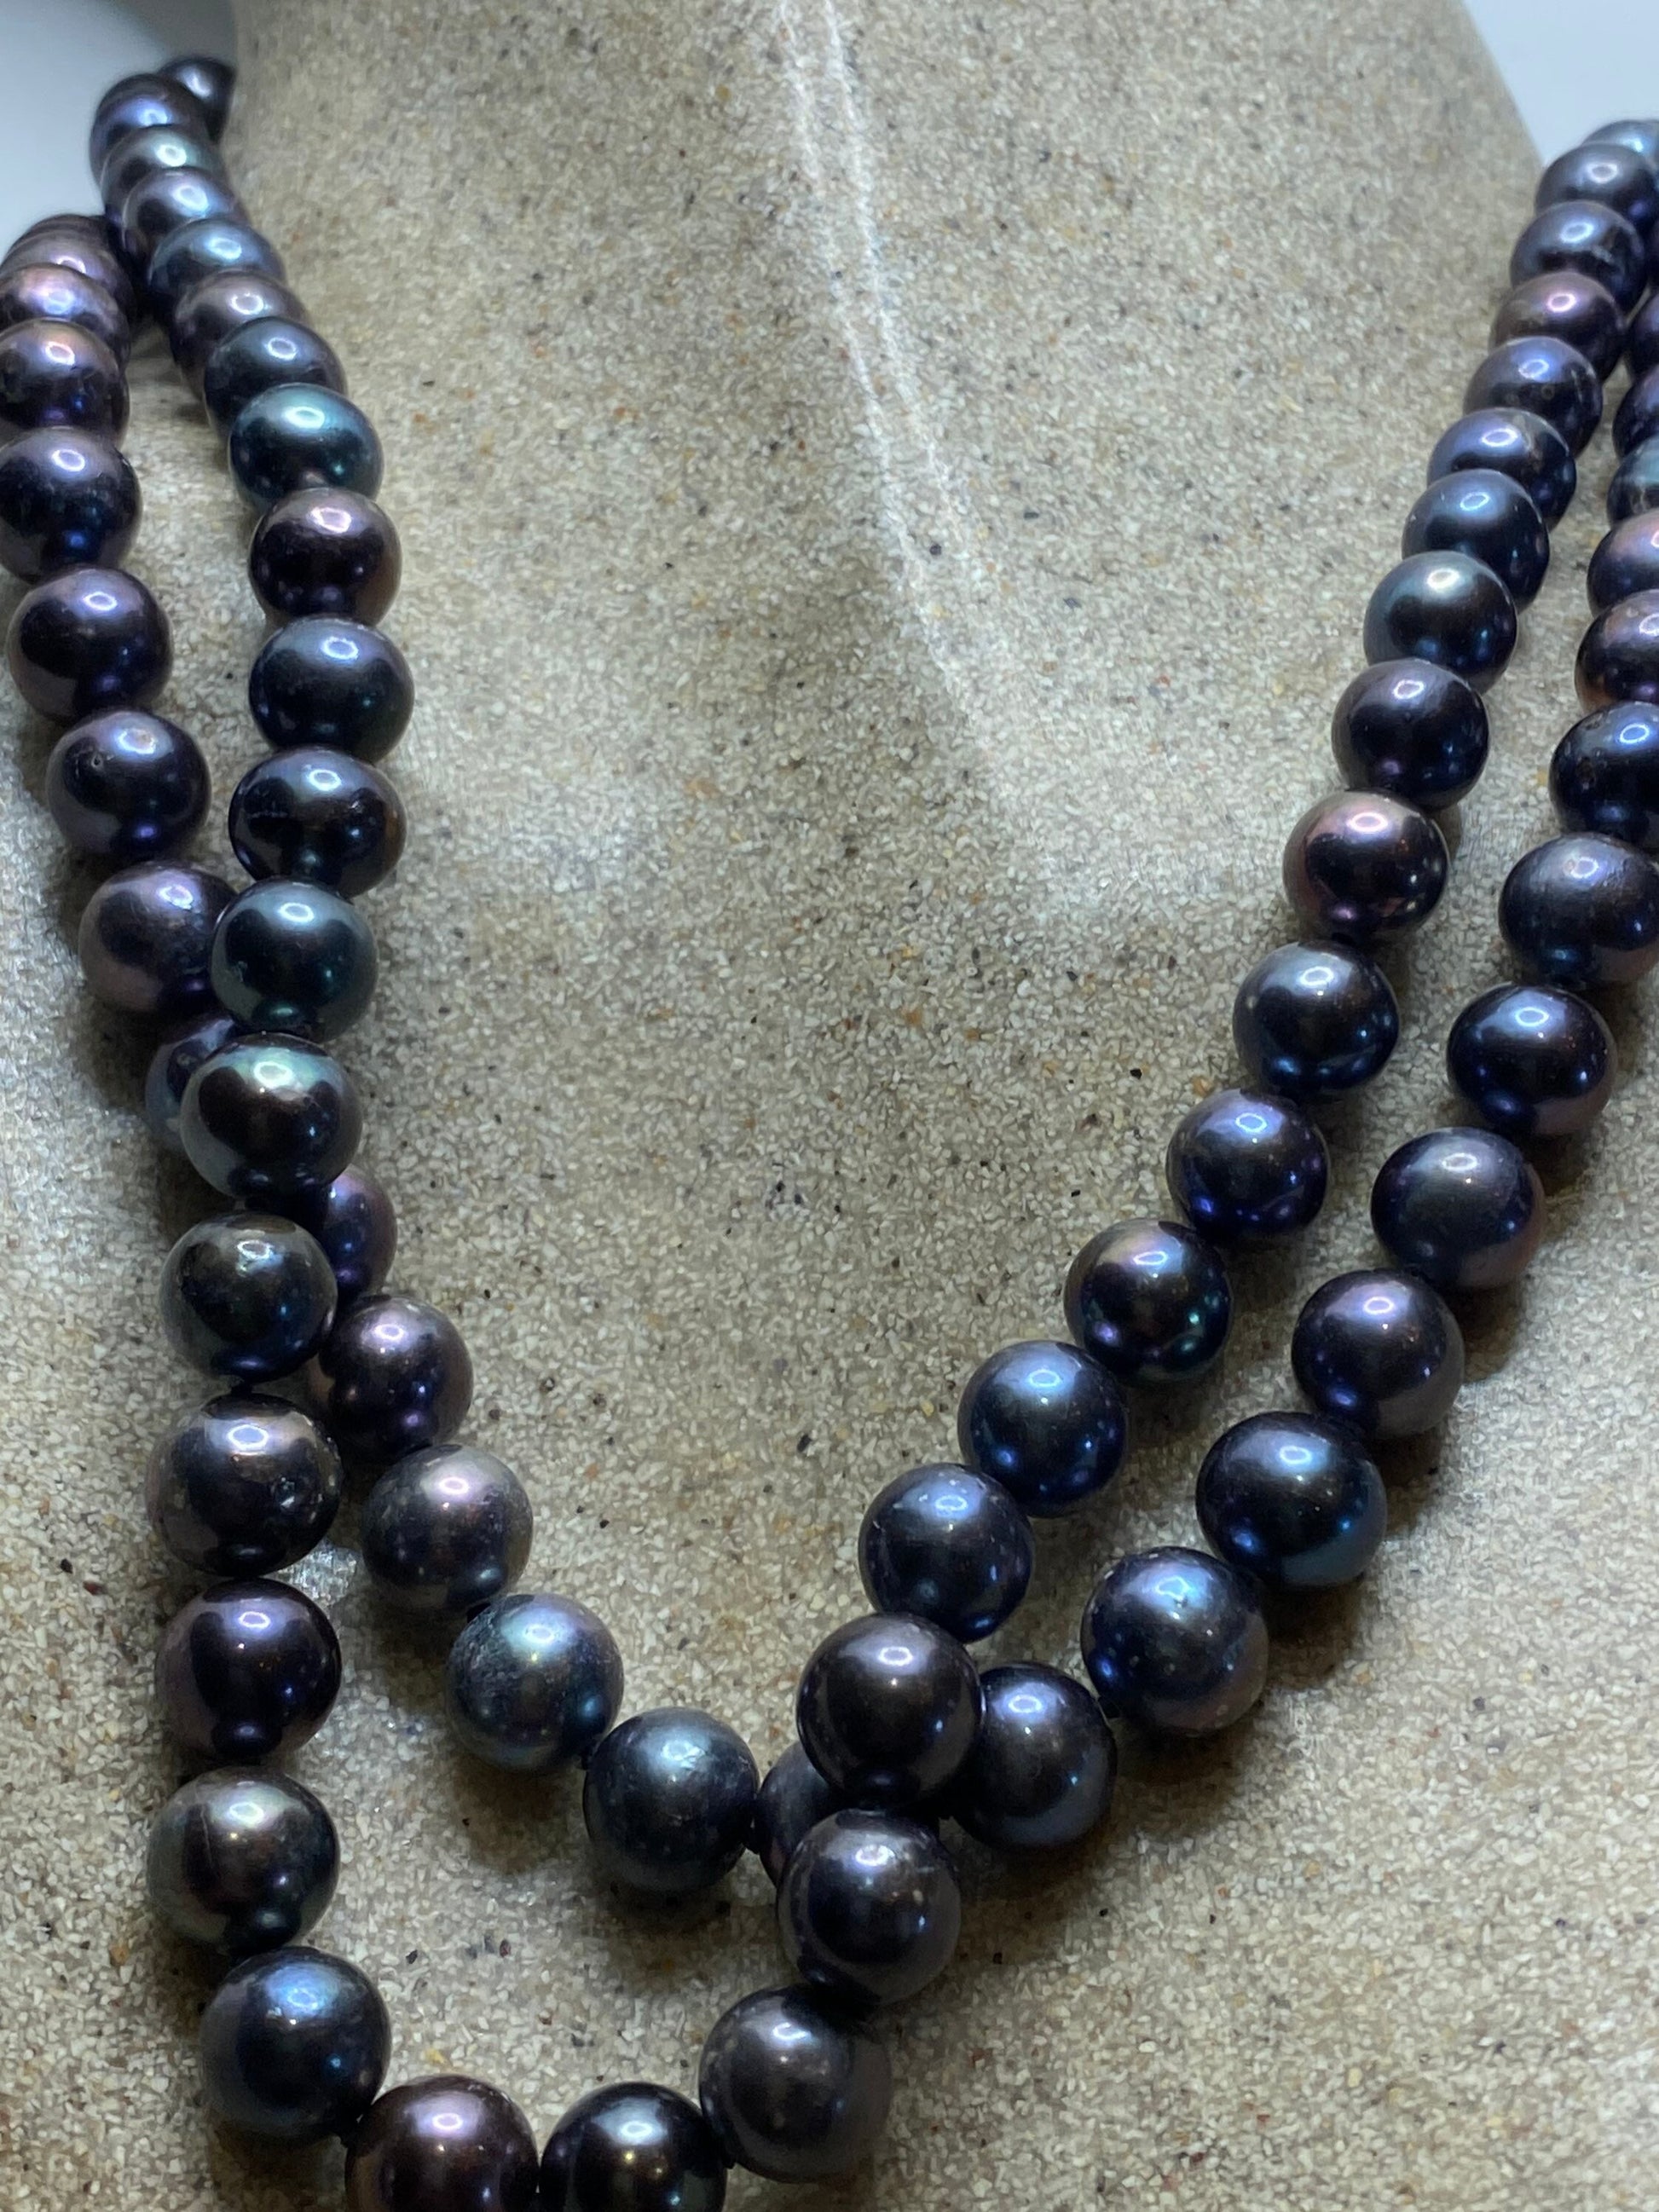 Vintage Hand Knotted Black Pearl Double 17 in Necklace